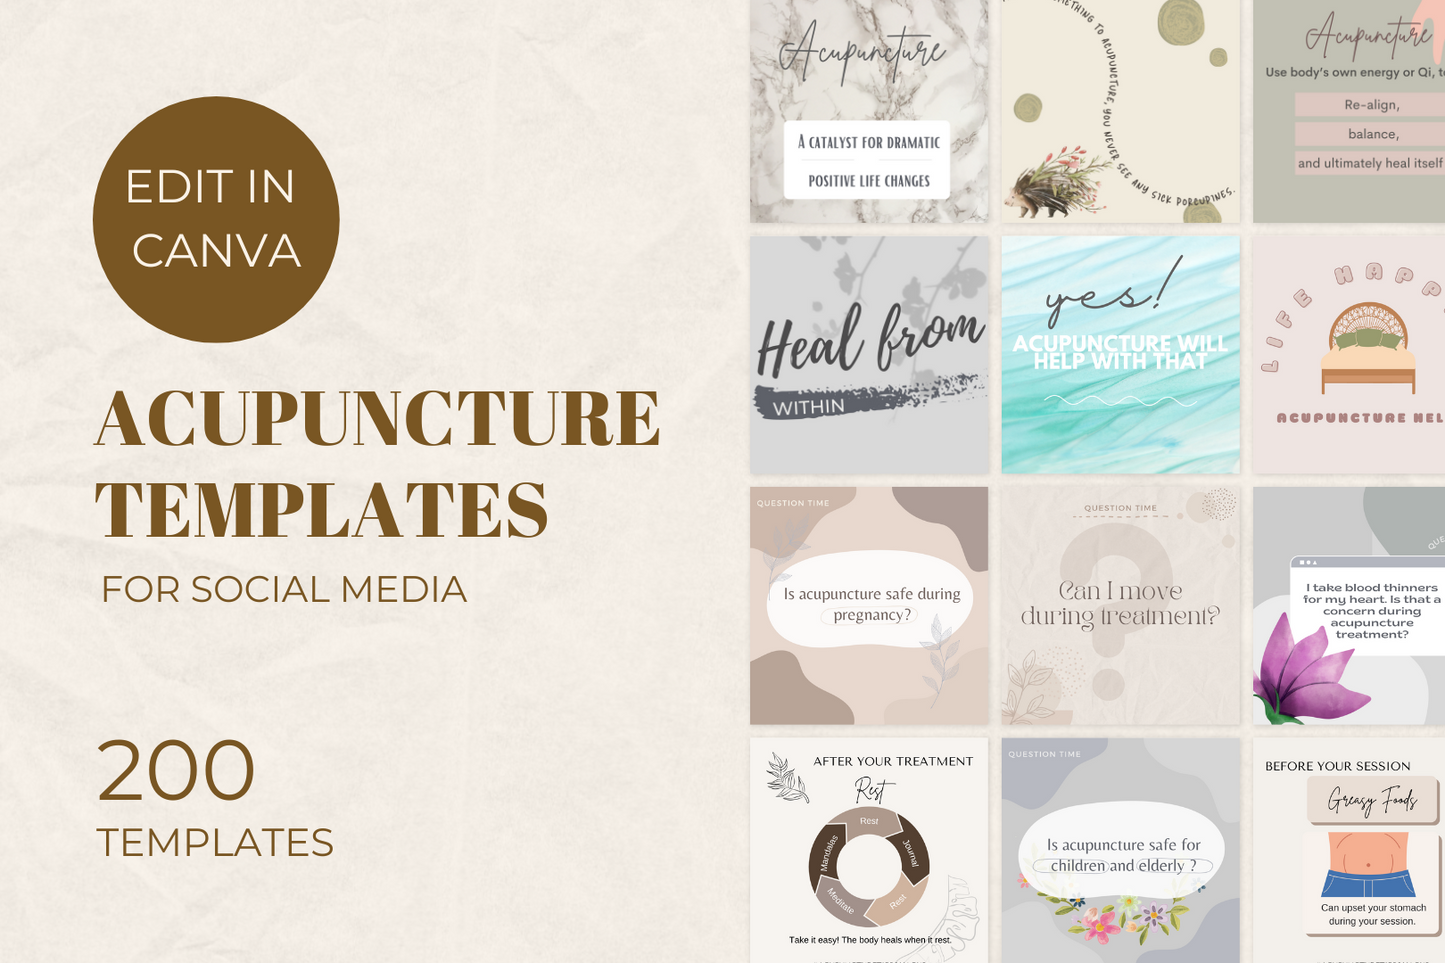 Acupuncture Social Media Posts - 200 Templates